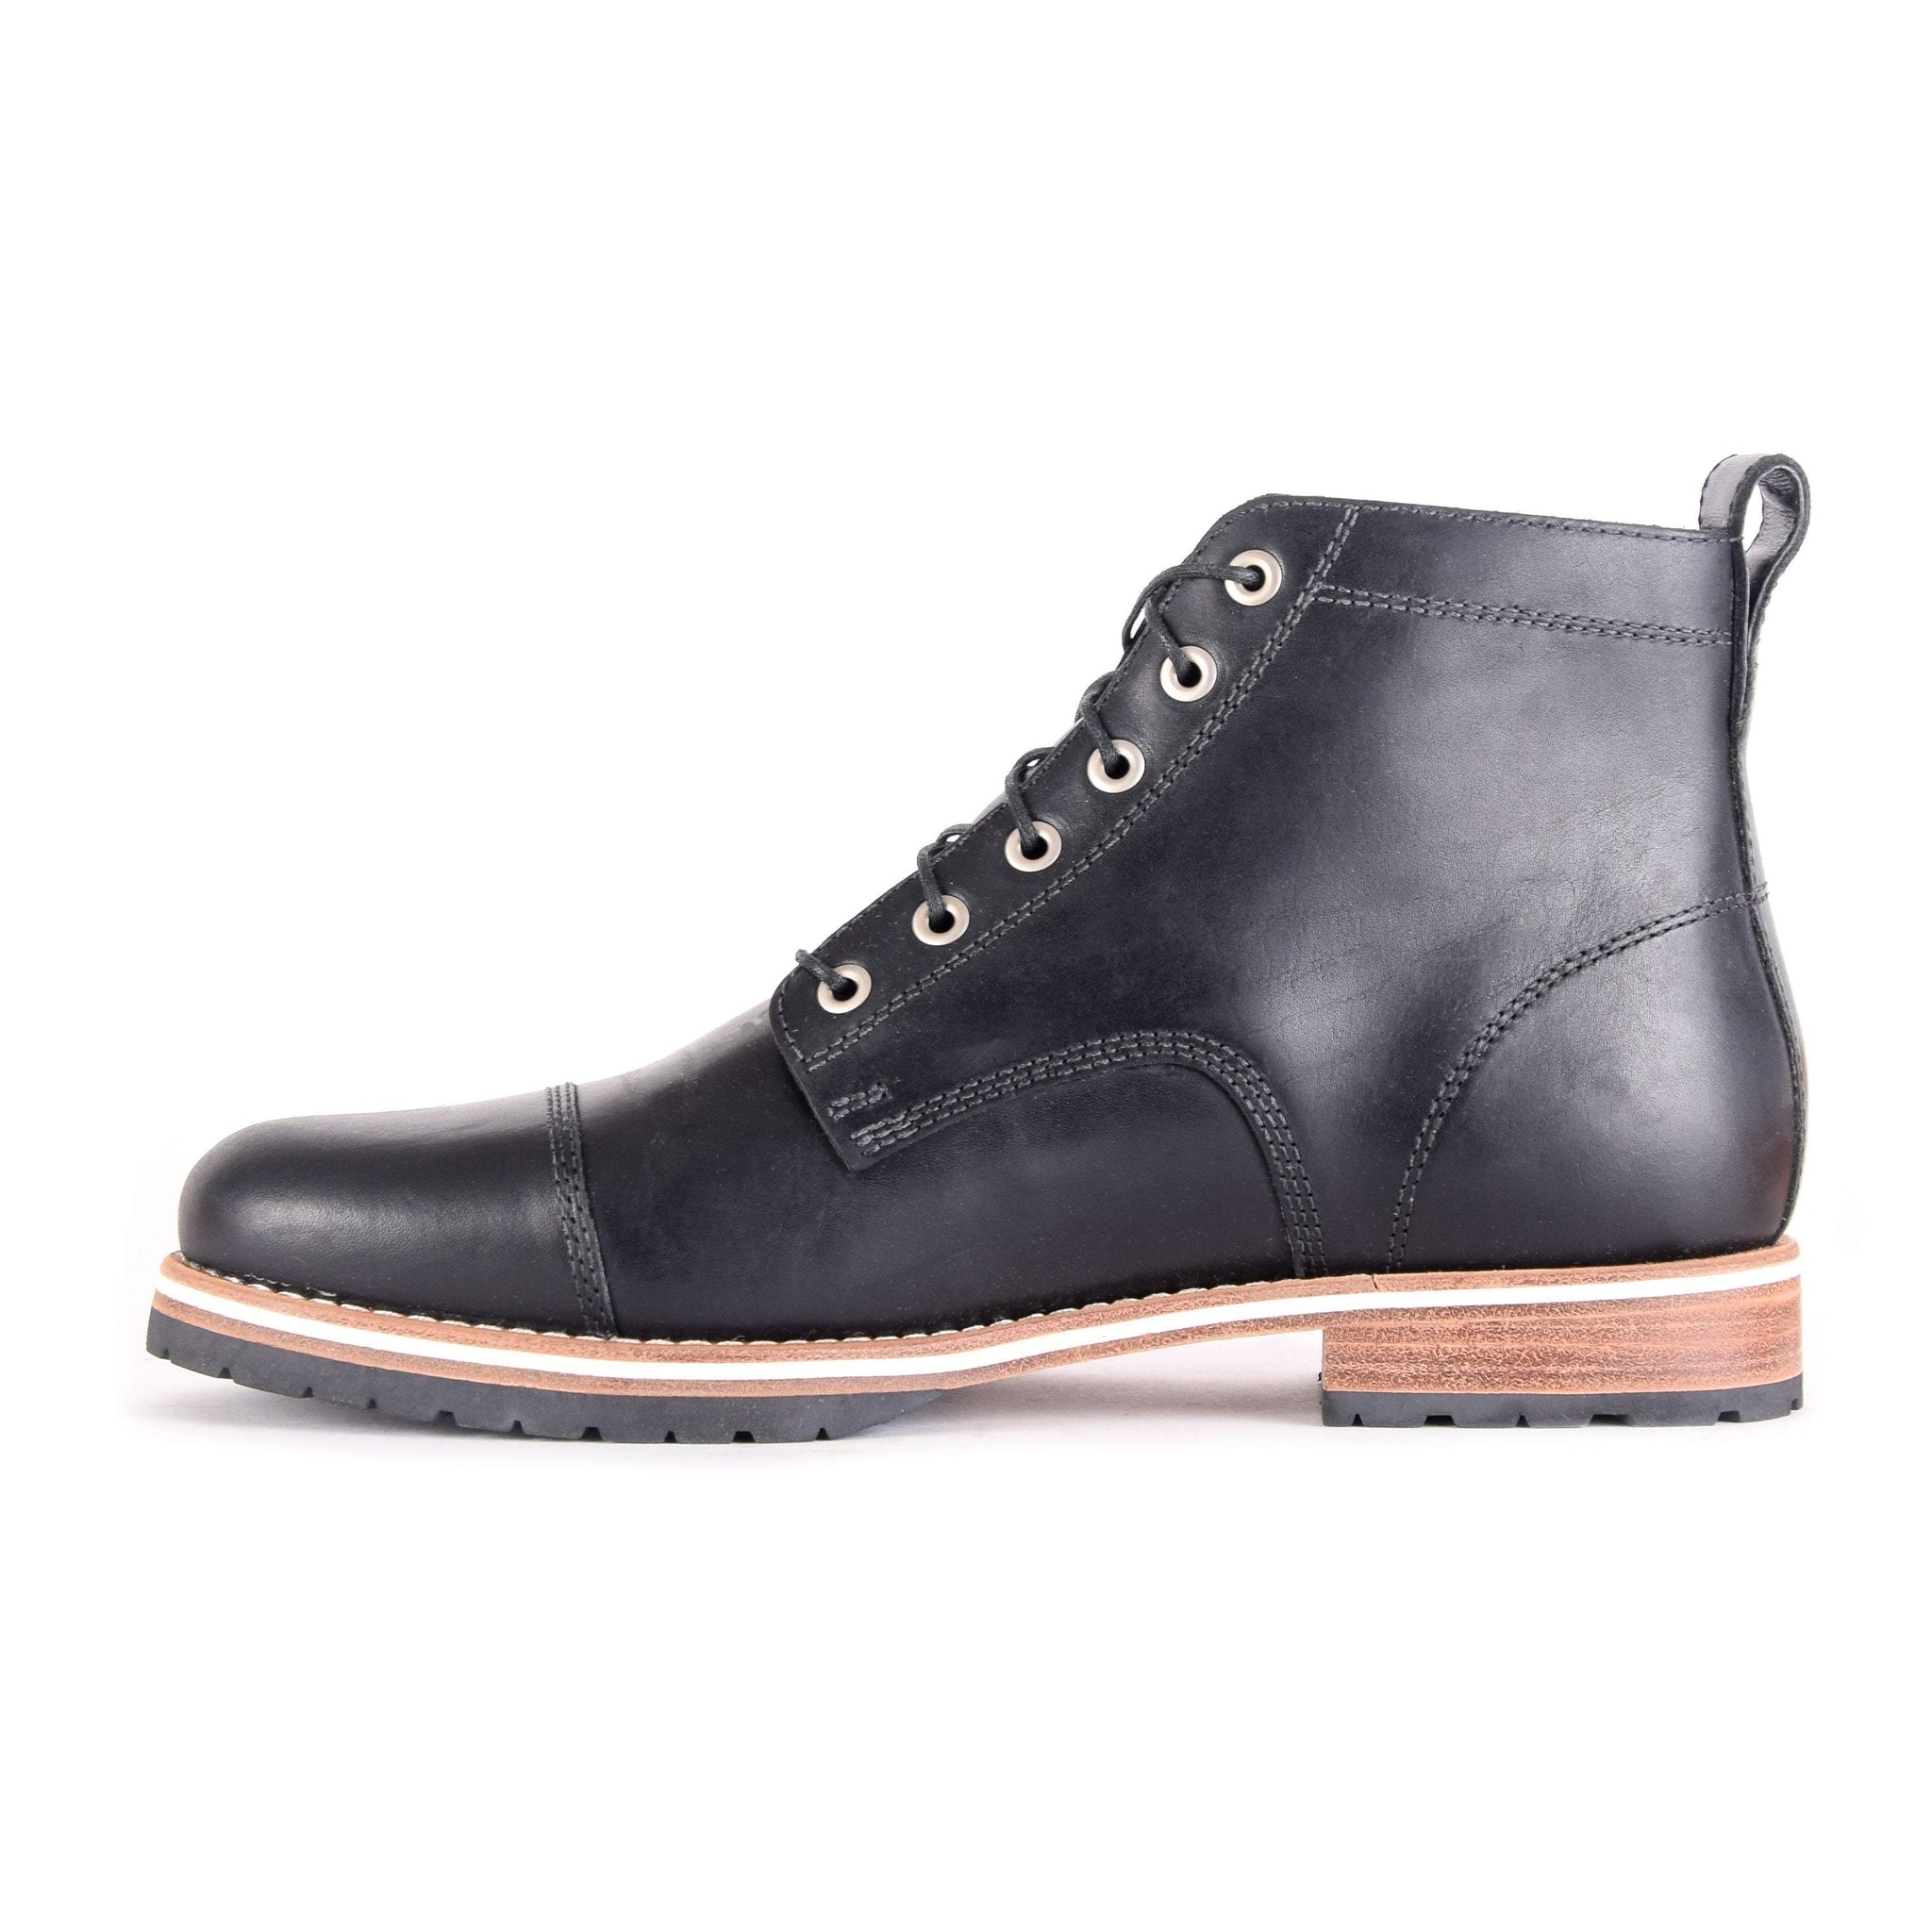 The Hollis Black by HELM Boots